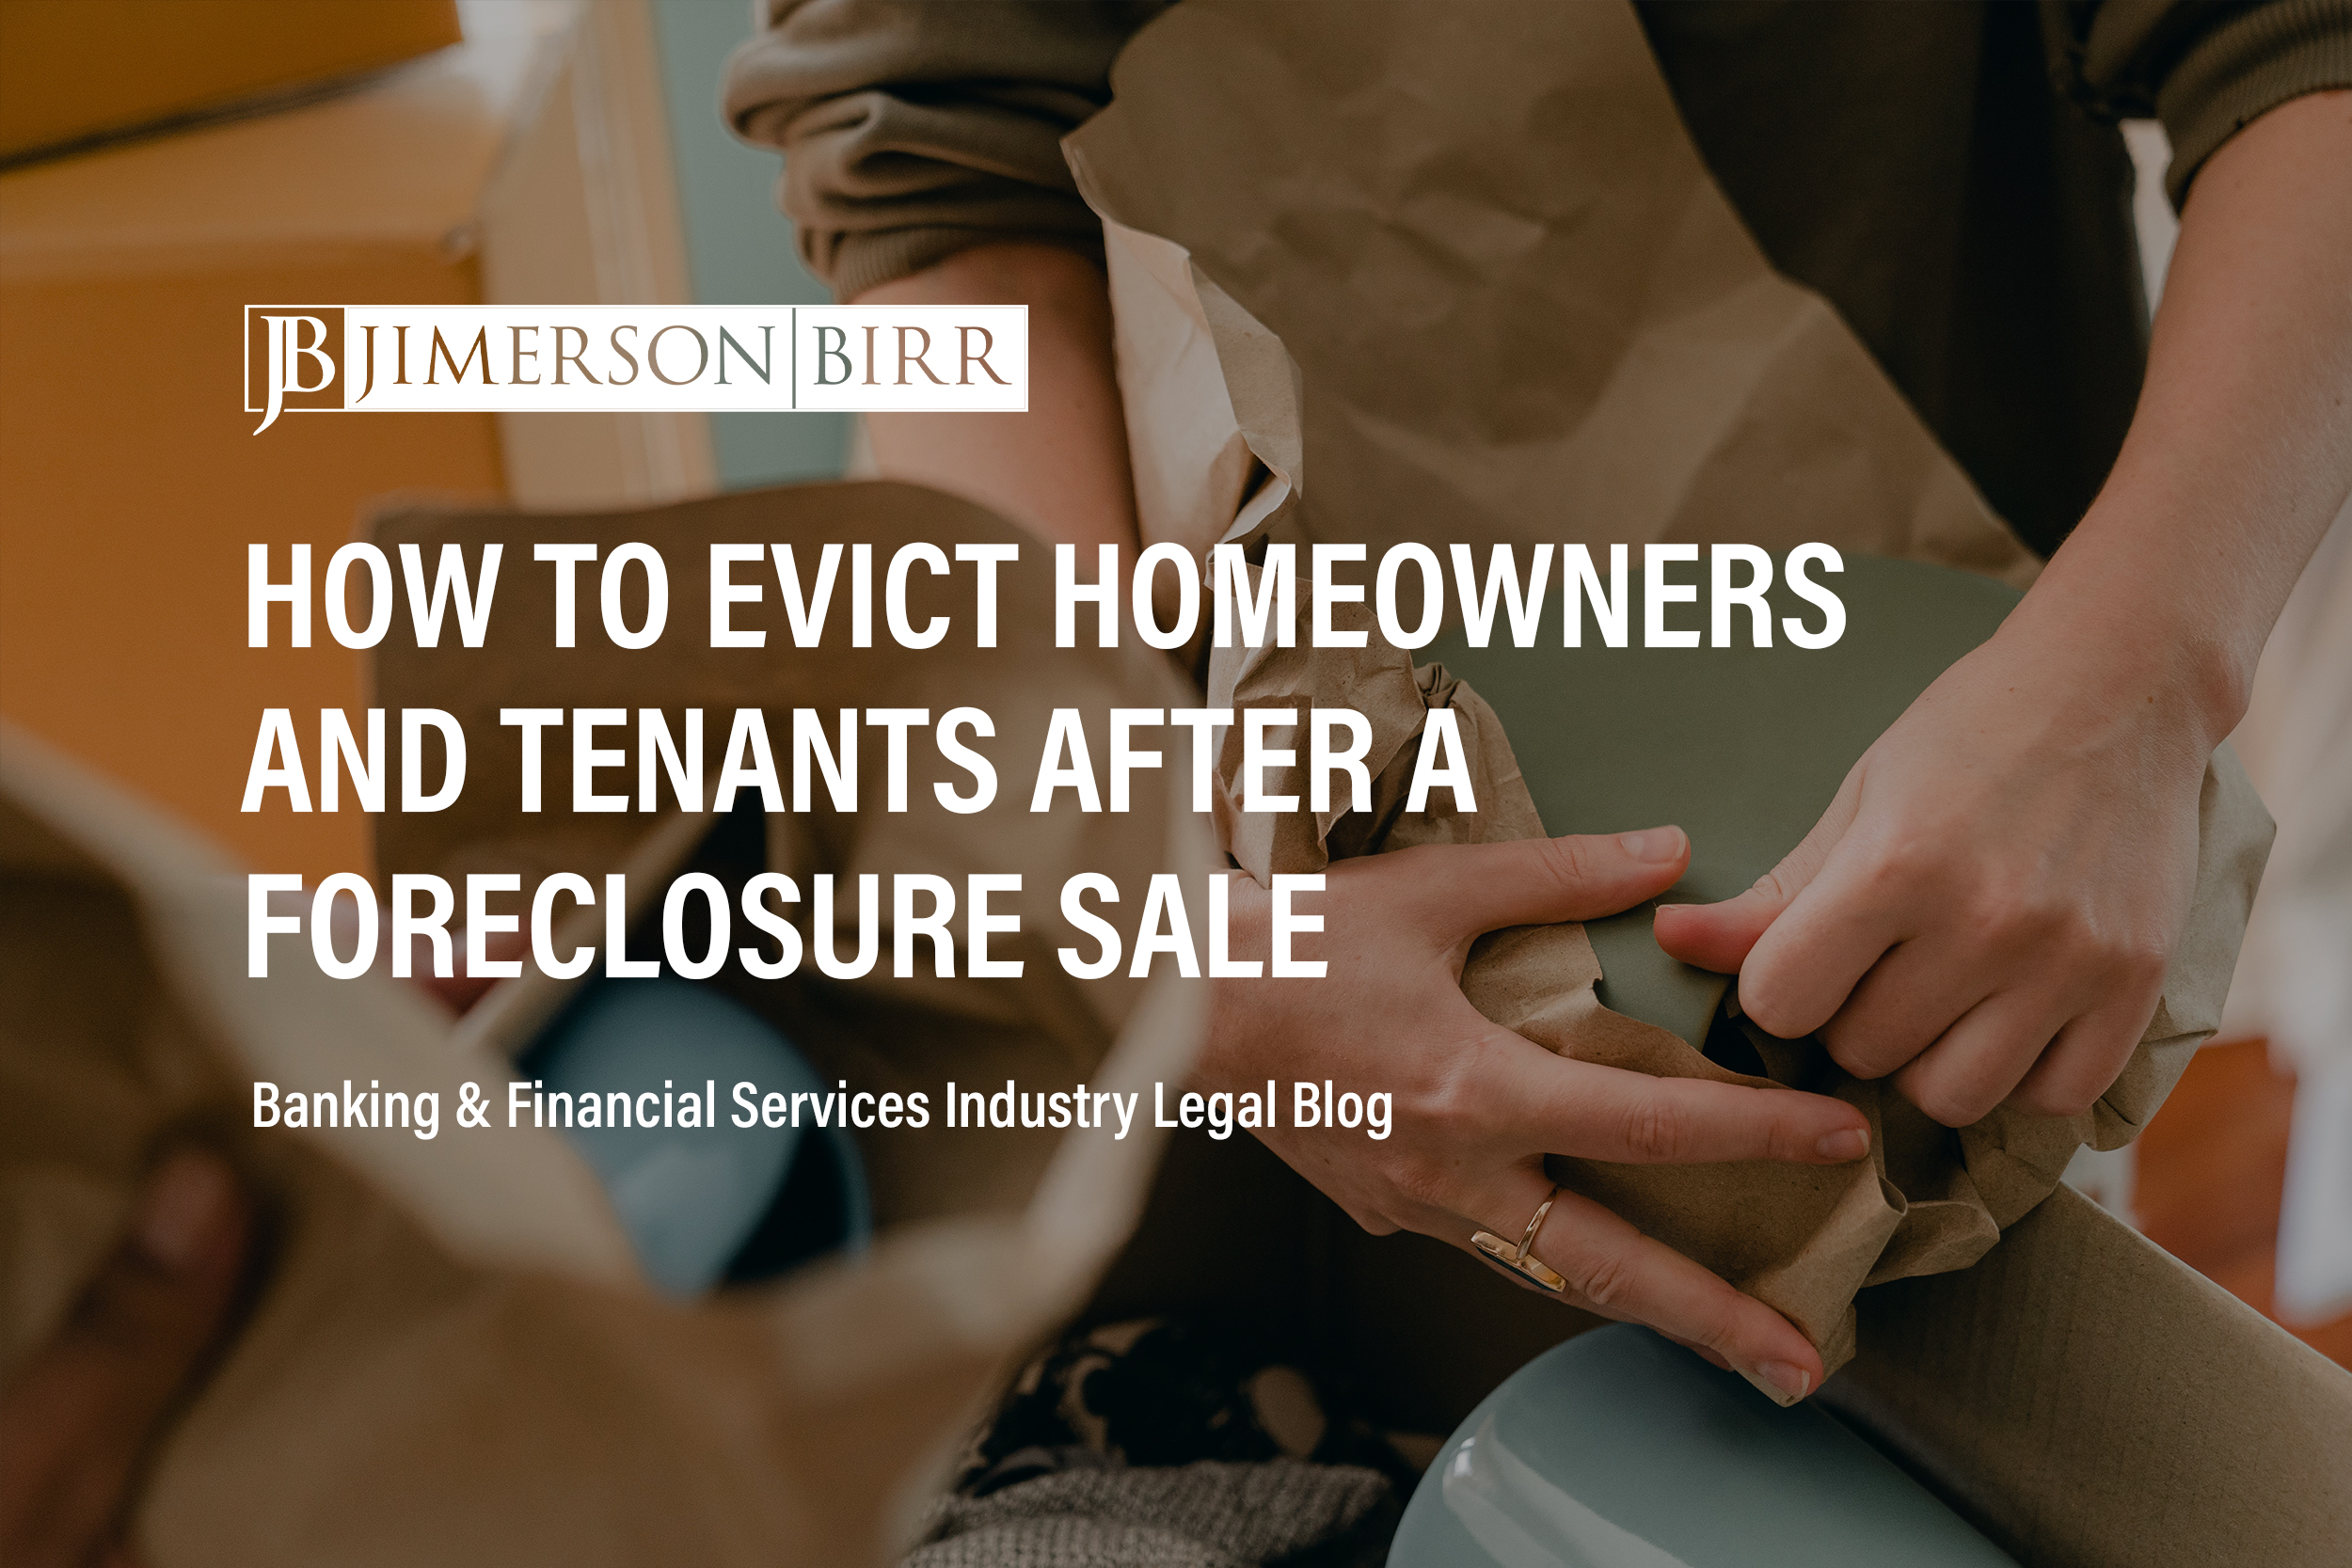 Evicting Homeowners and Tenants After Foreclosure Sale